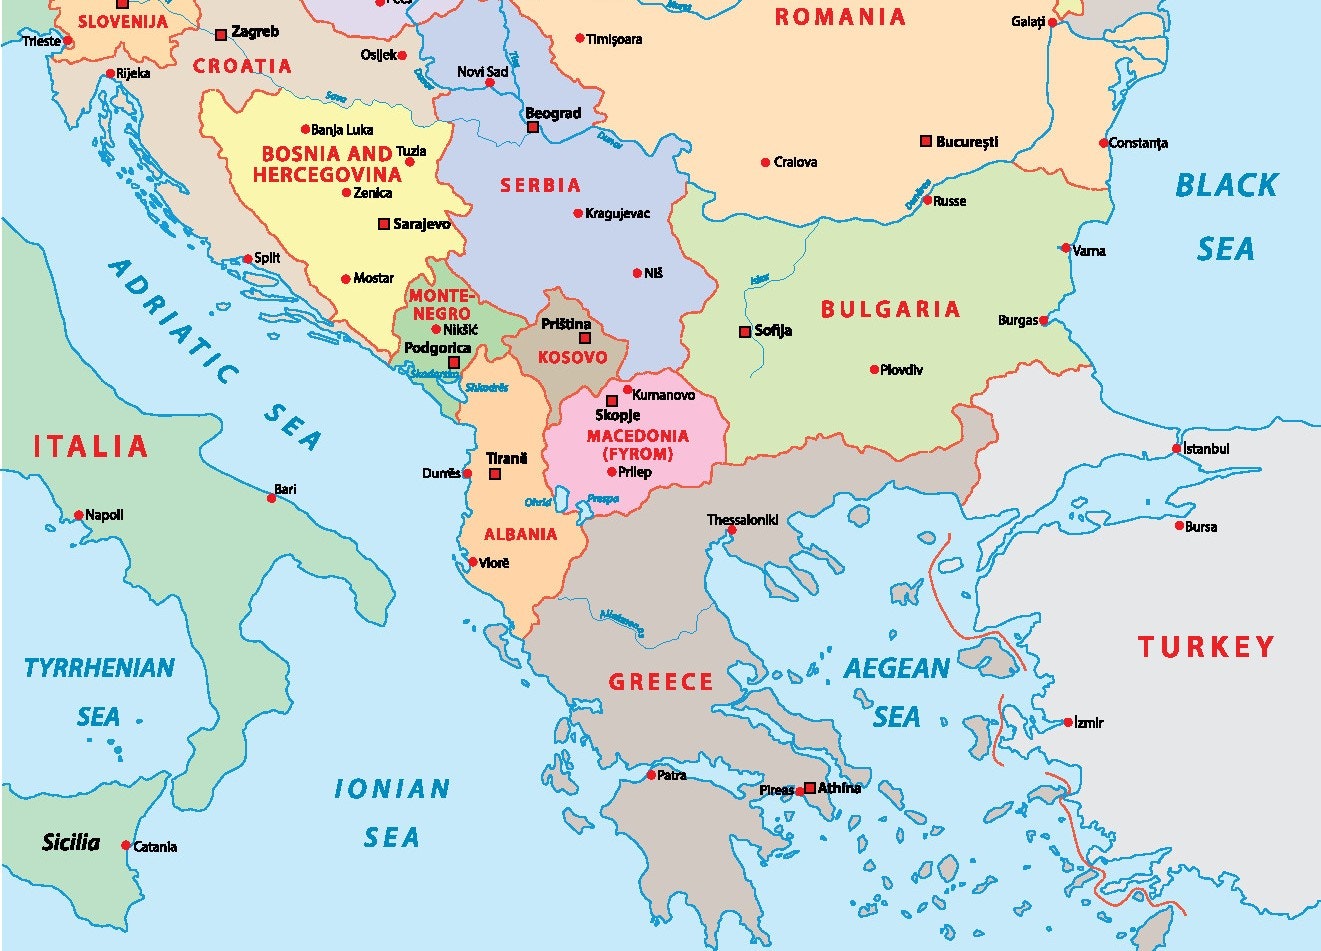 Map of south-eastern Europe